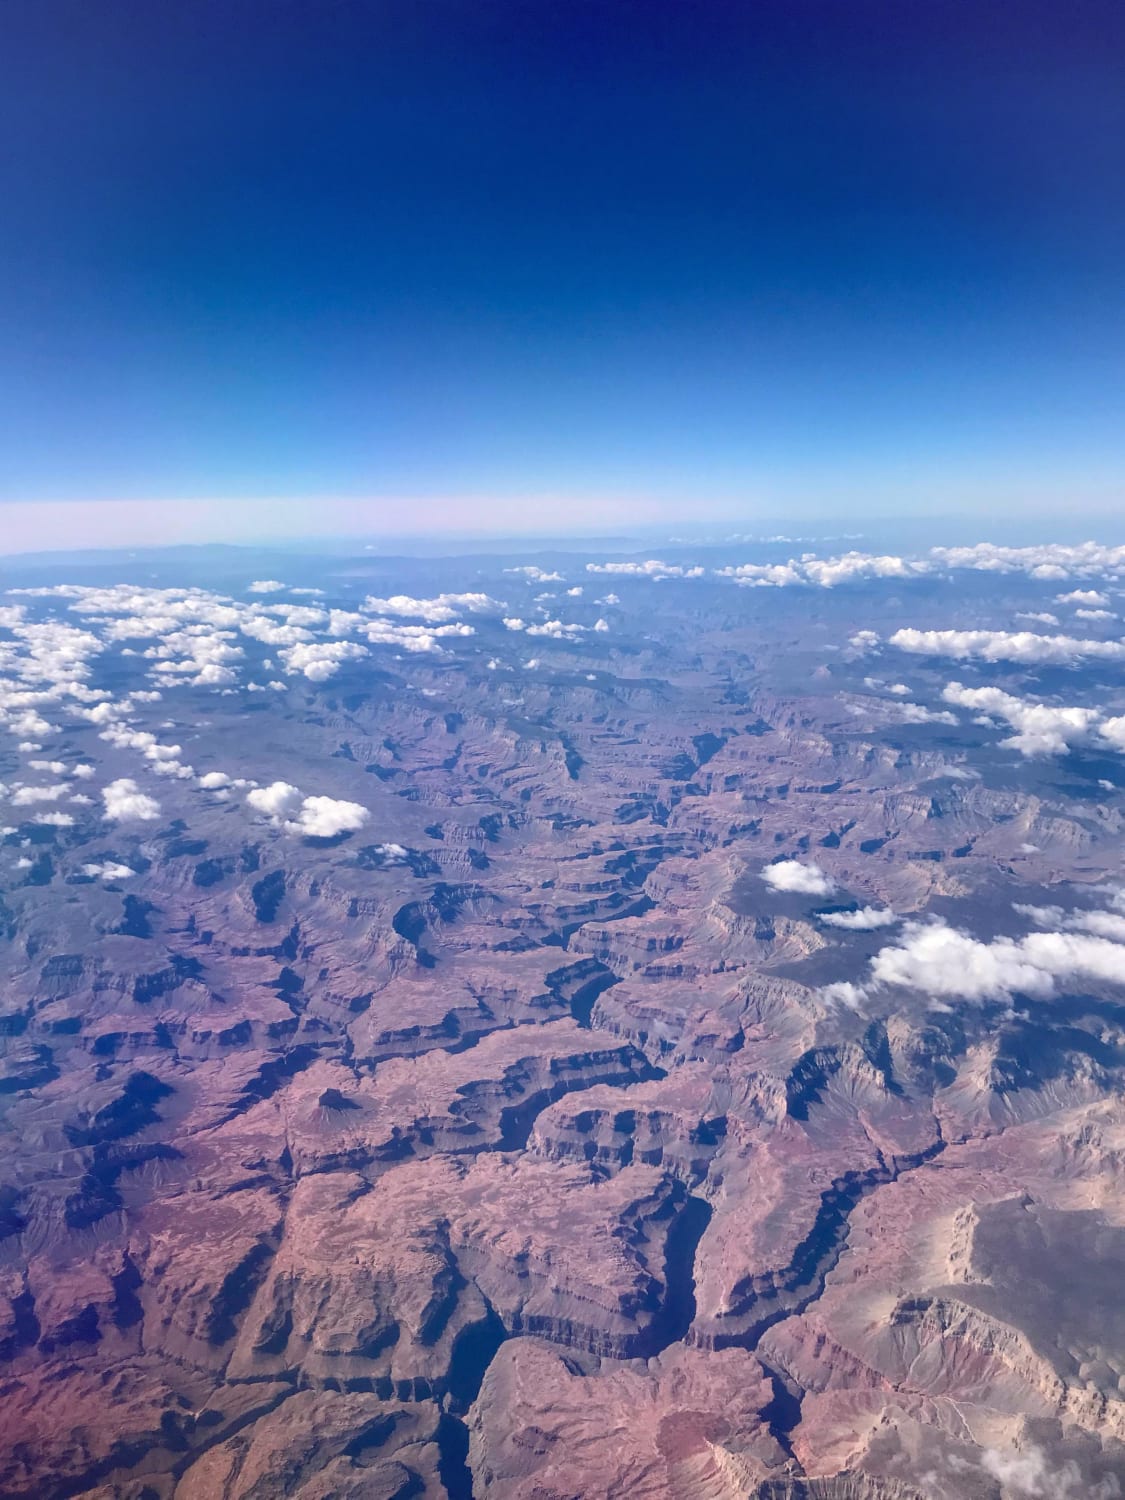 The Grand Canyon from 30,000 feet